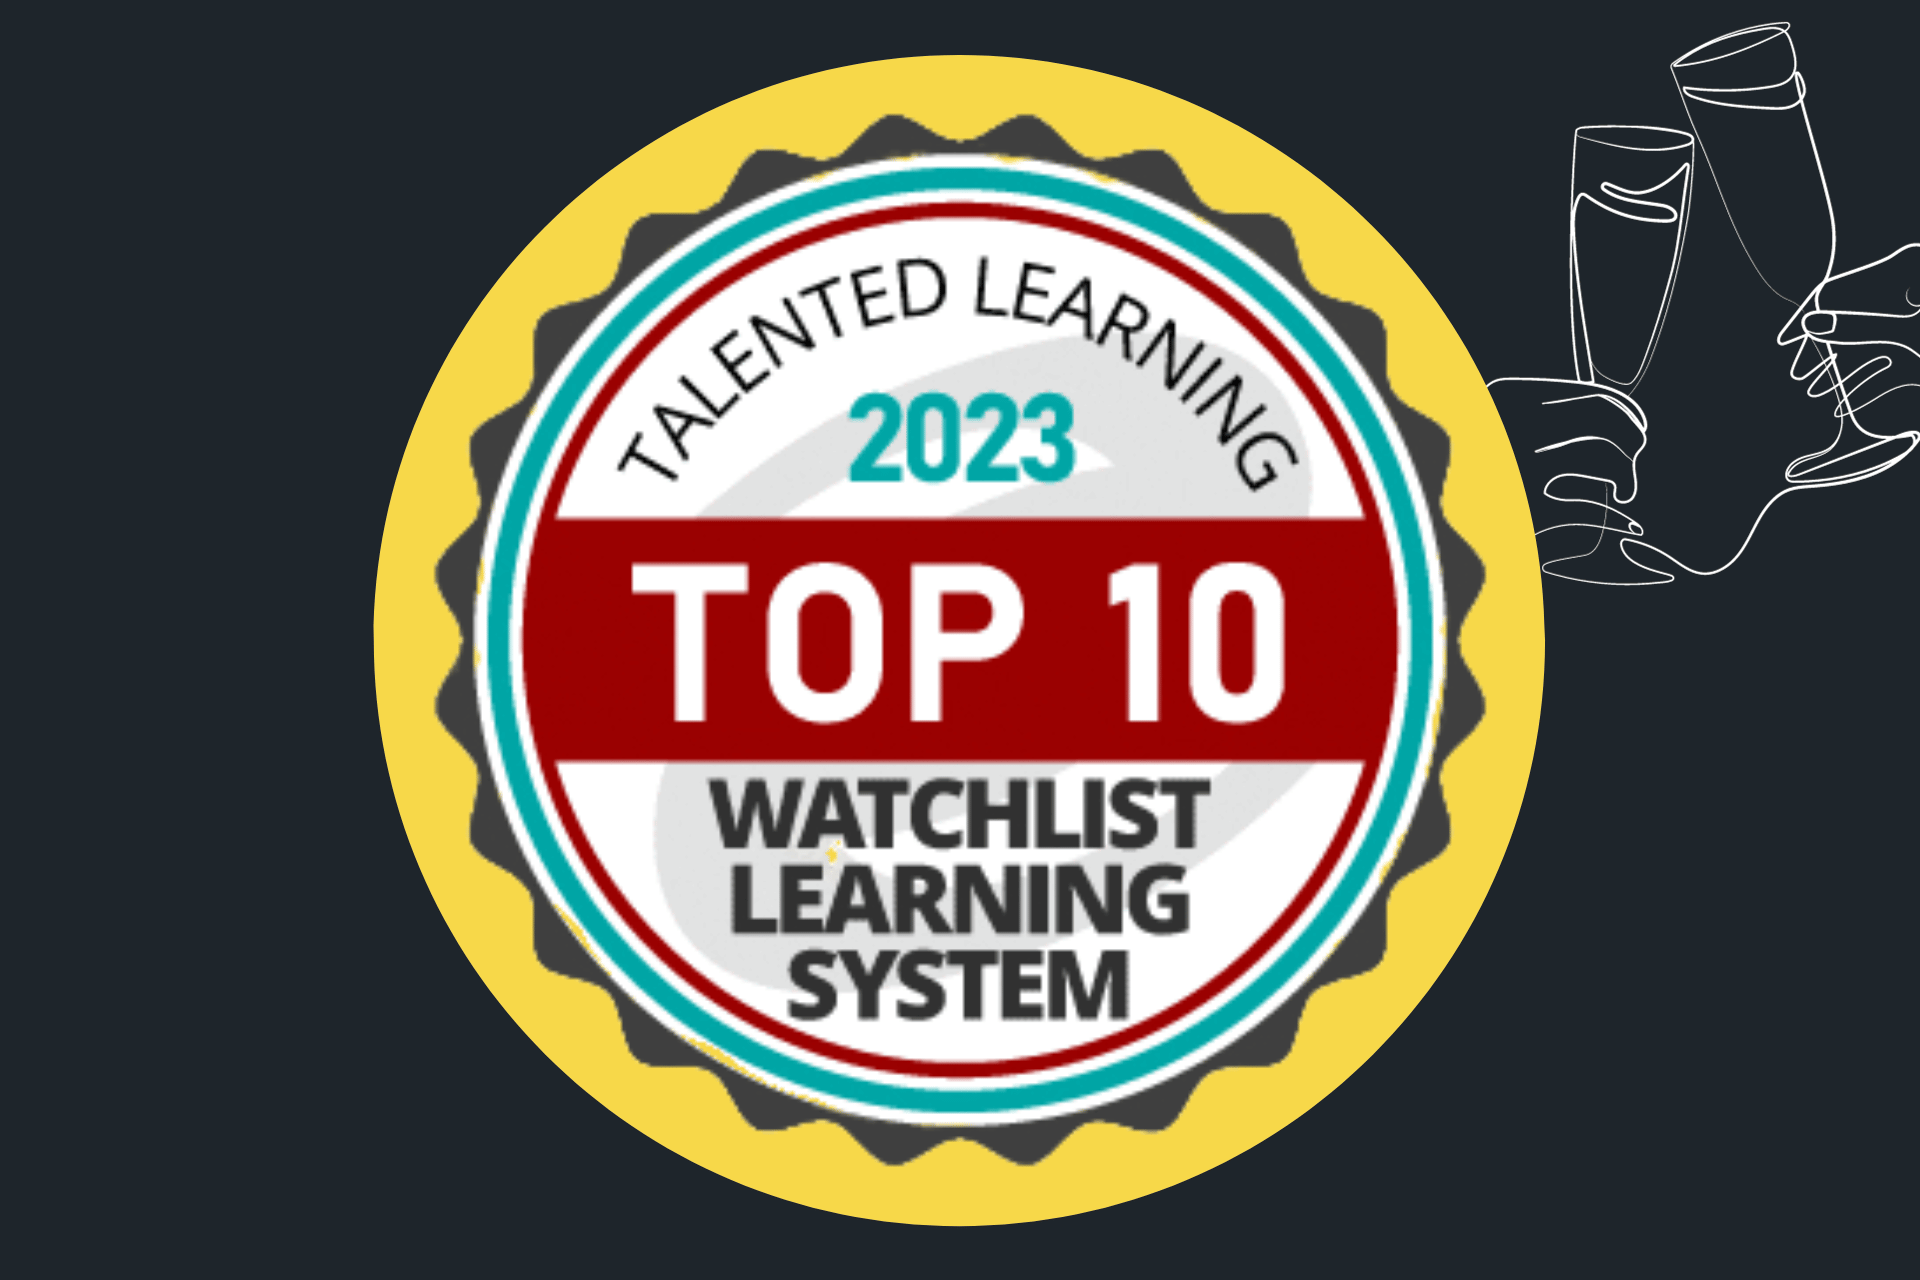 Talented Learning Watchlist